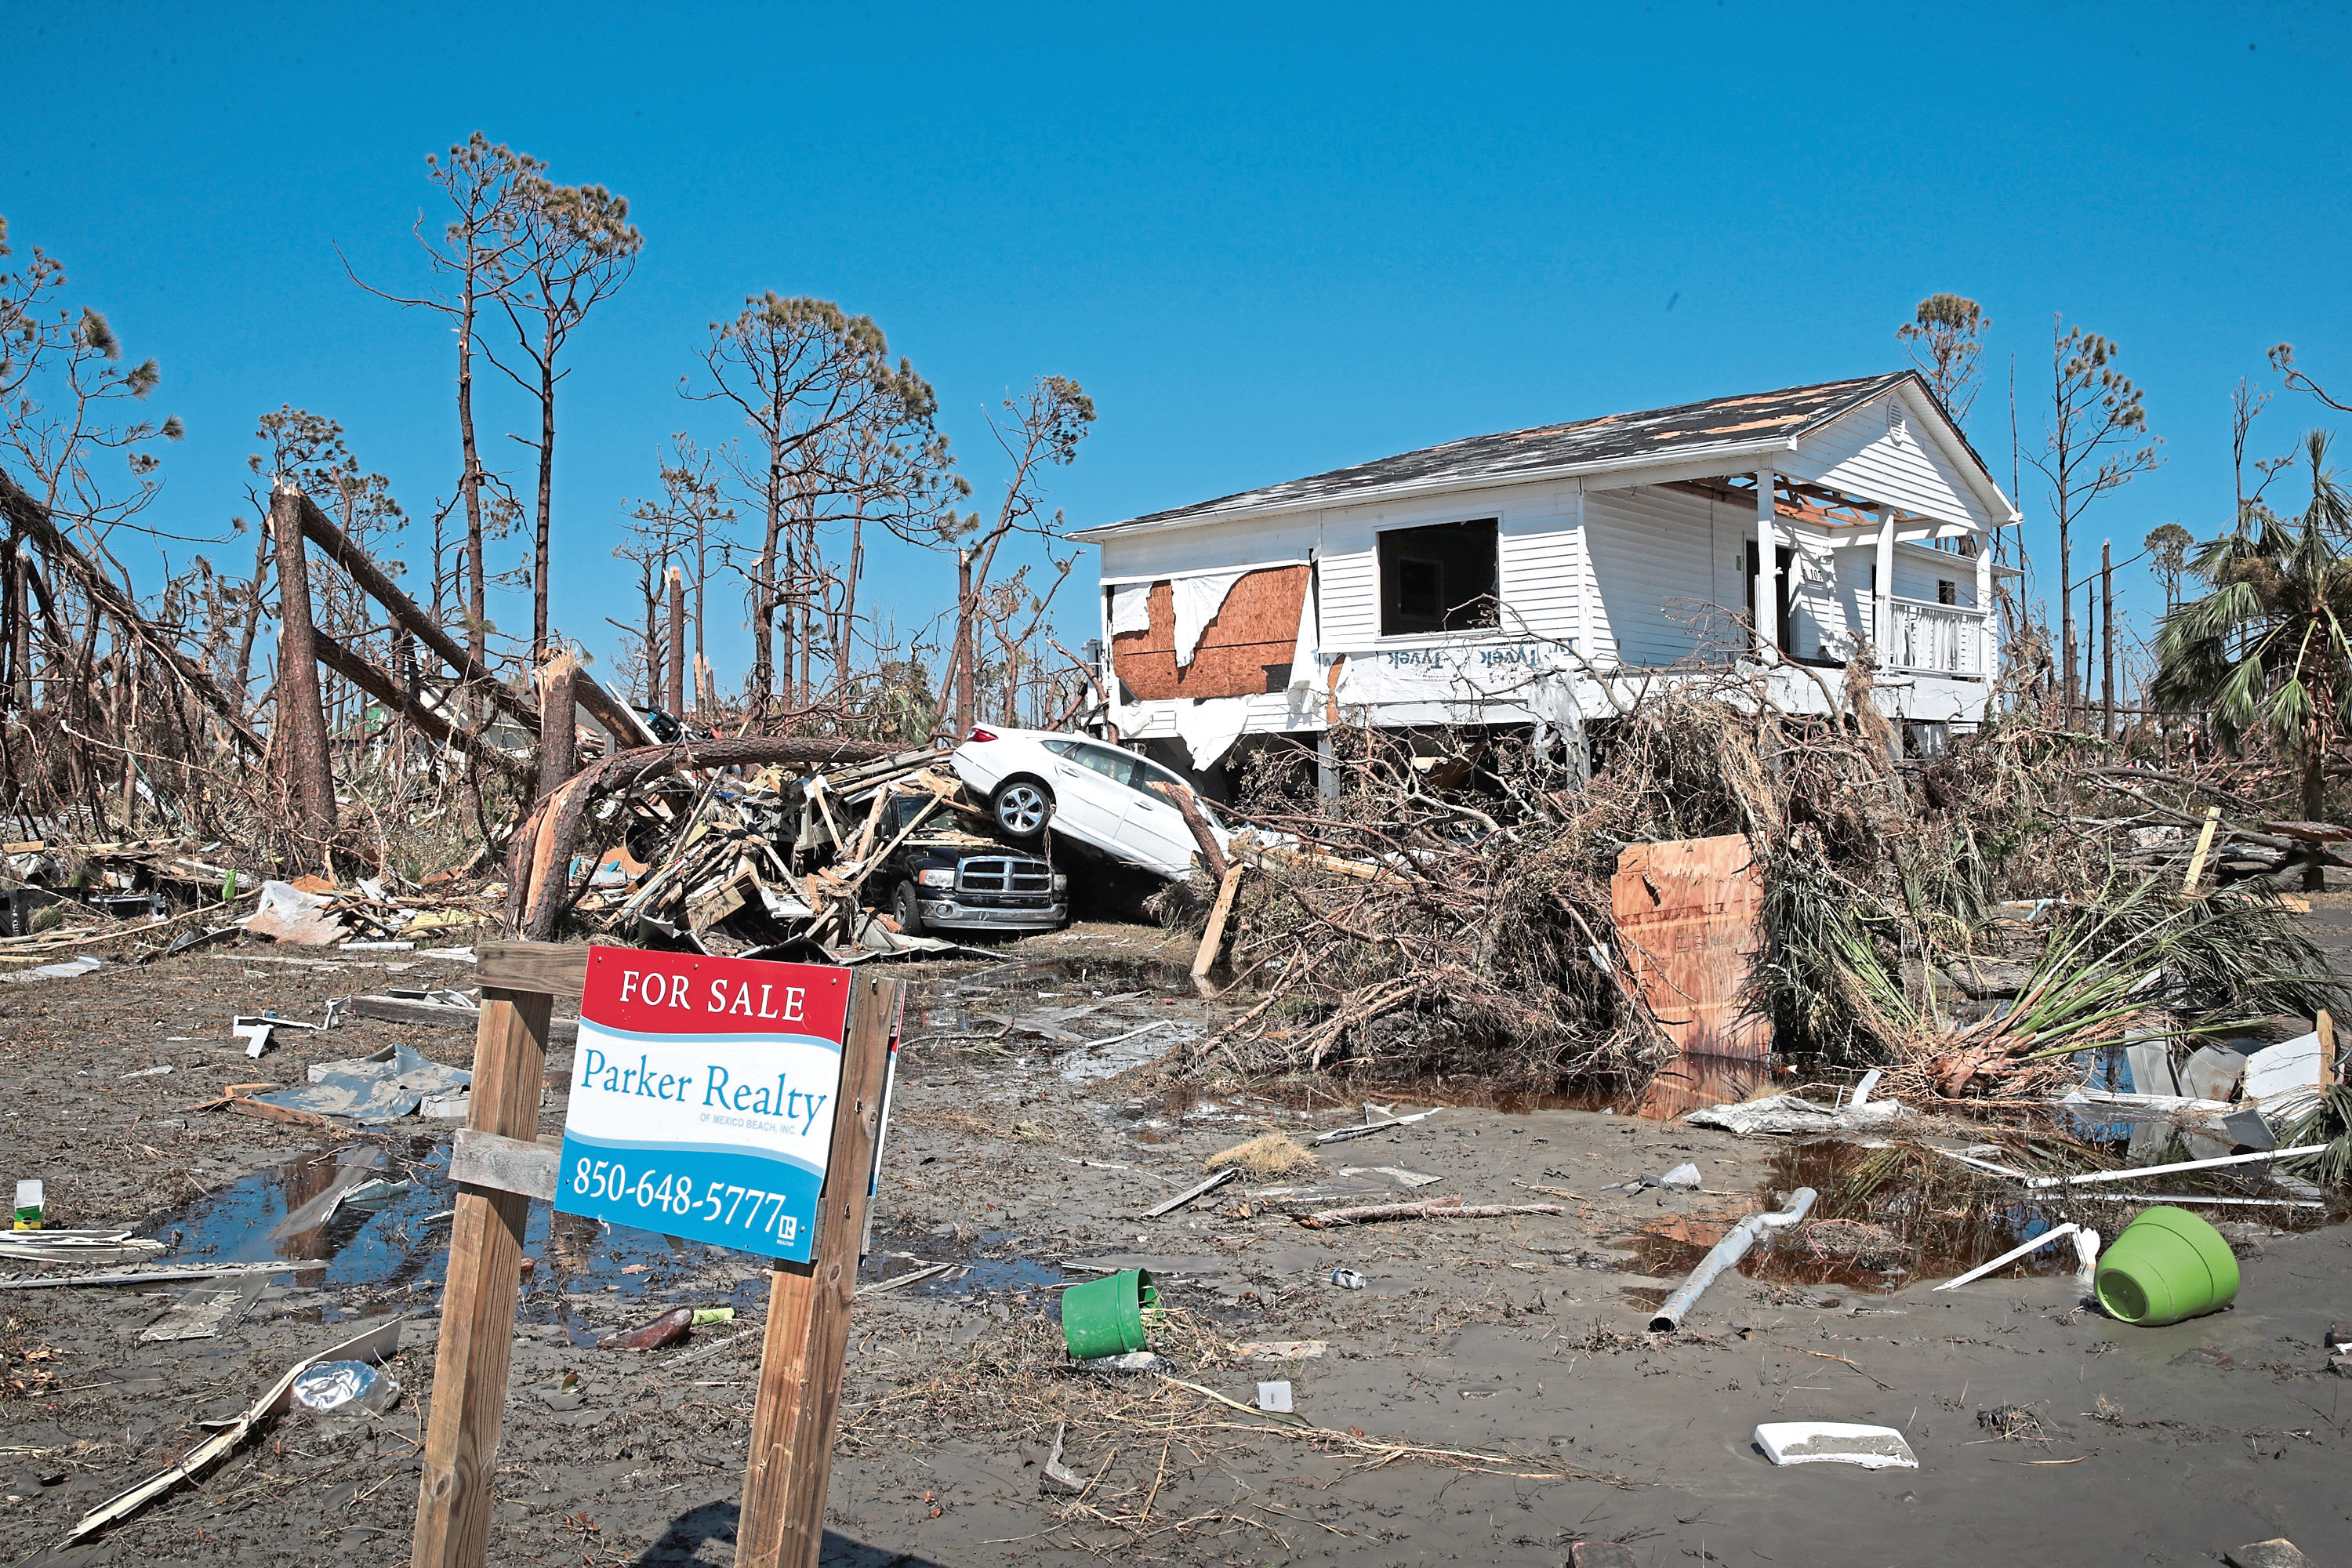 MEXICO BEACH, FL - OCTOBER 13:  Storm debris litters the town after Hurricane Michael on October 13, 2018 in Mexico Beach, Florida. Hurricane Michael slammed into the Florida Panhandle on October 10, as a category 4 storm causing massive damage and claiming the lives of 17 people.  (Photo by Scott Olson/Getty Images)